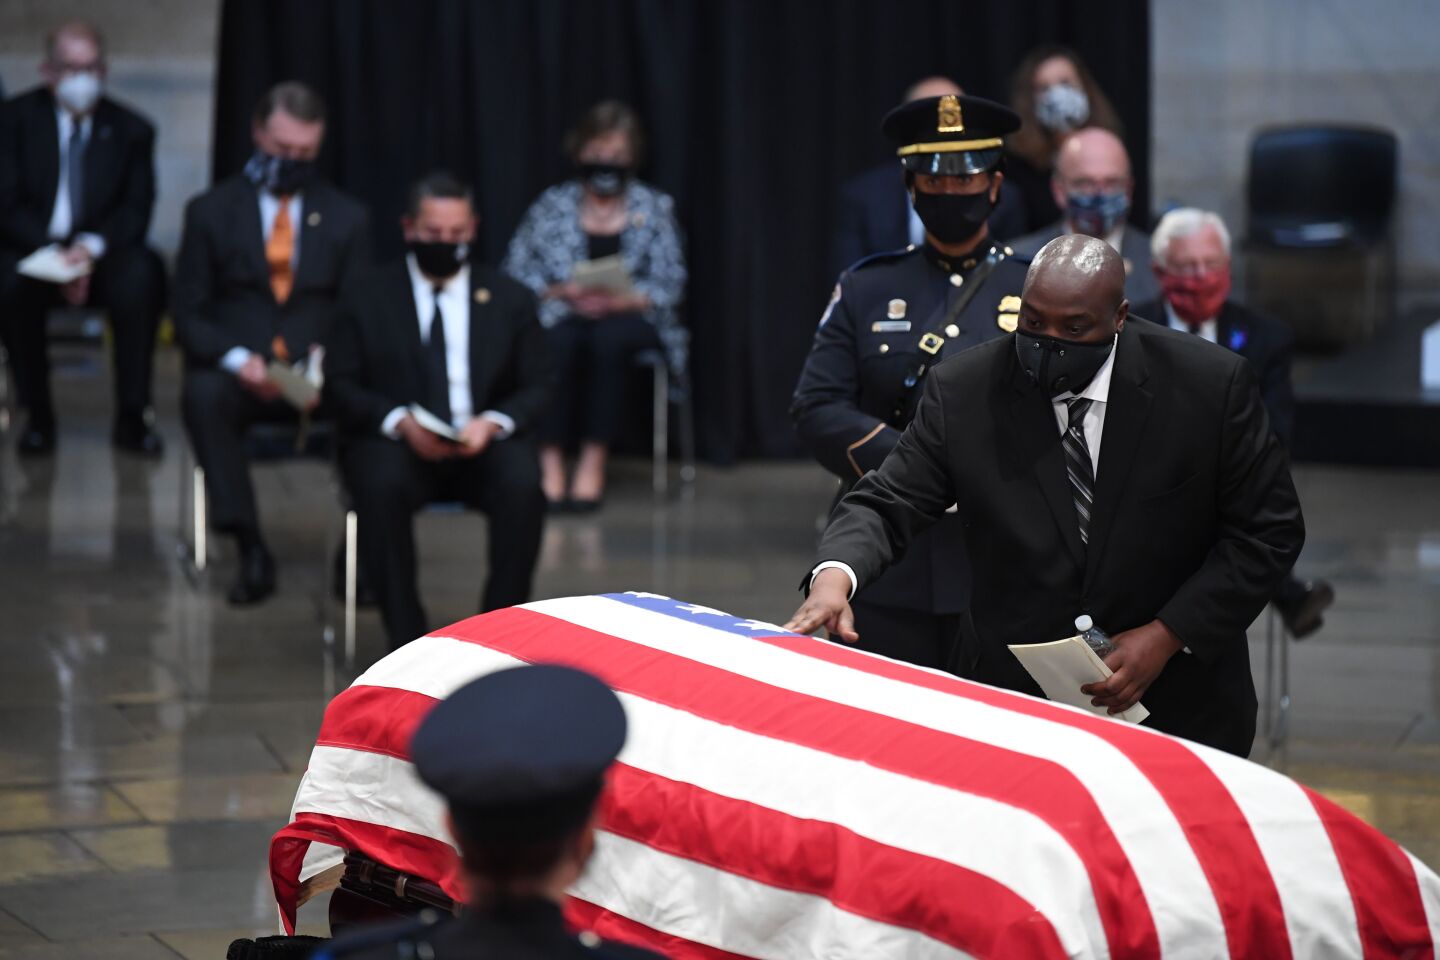 John-Miles Lewis touches the casket of his father, the late Rep. John Lewis, D-GA, a key figure in the civil rights movement in the Rotunda of the US Capitol in Washington, DC.